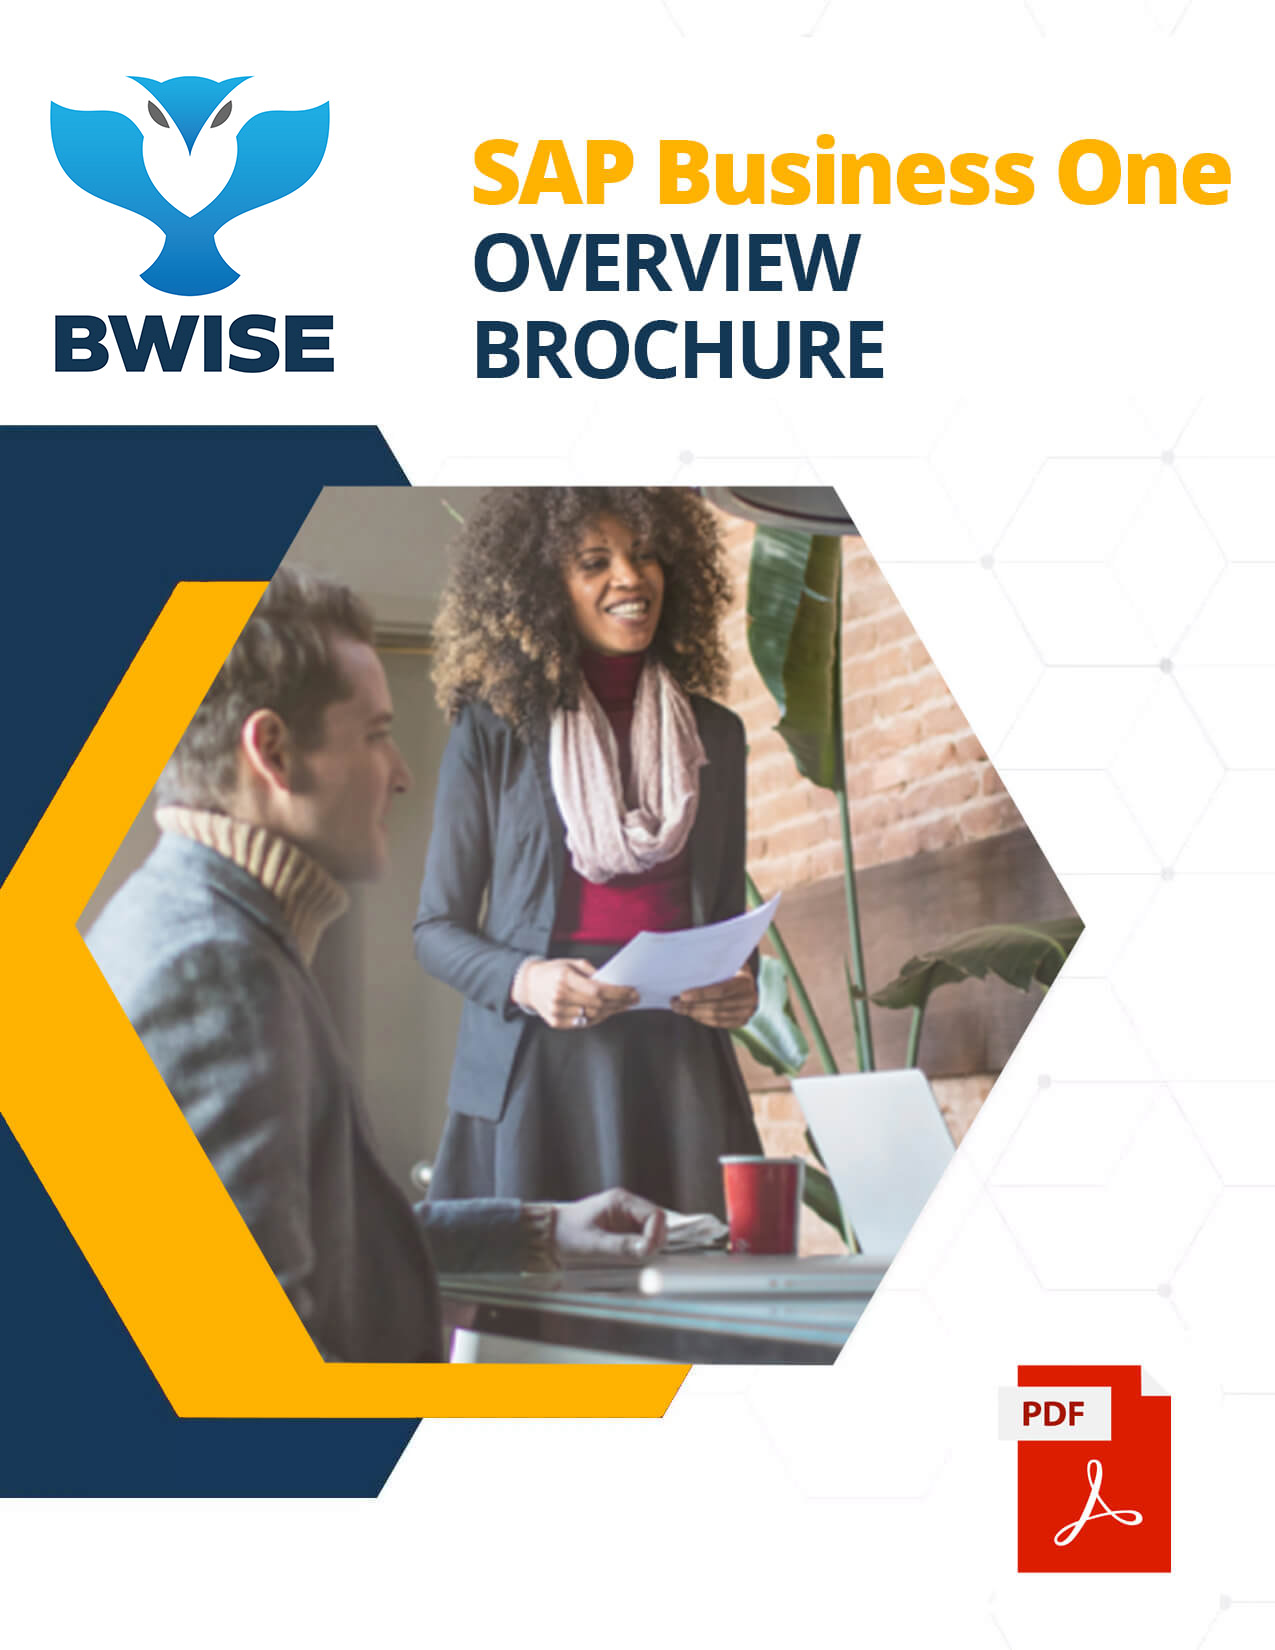 SAP BUSINESS ONE OVERVIEW BROCHURE